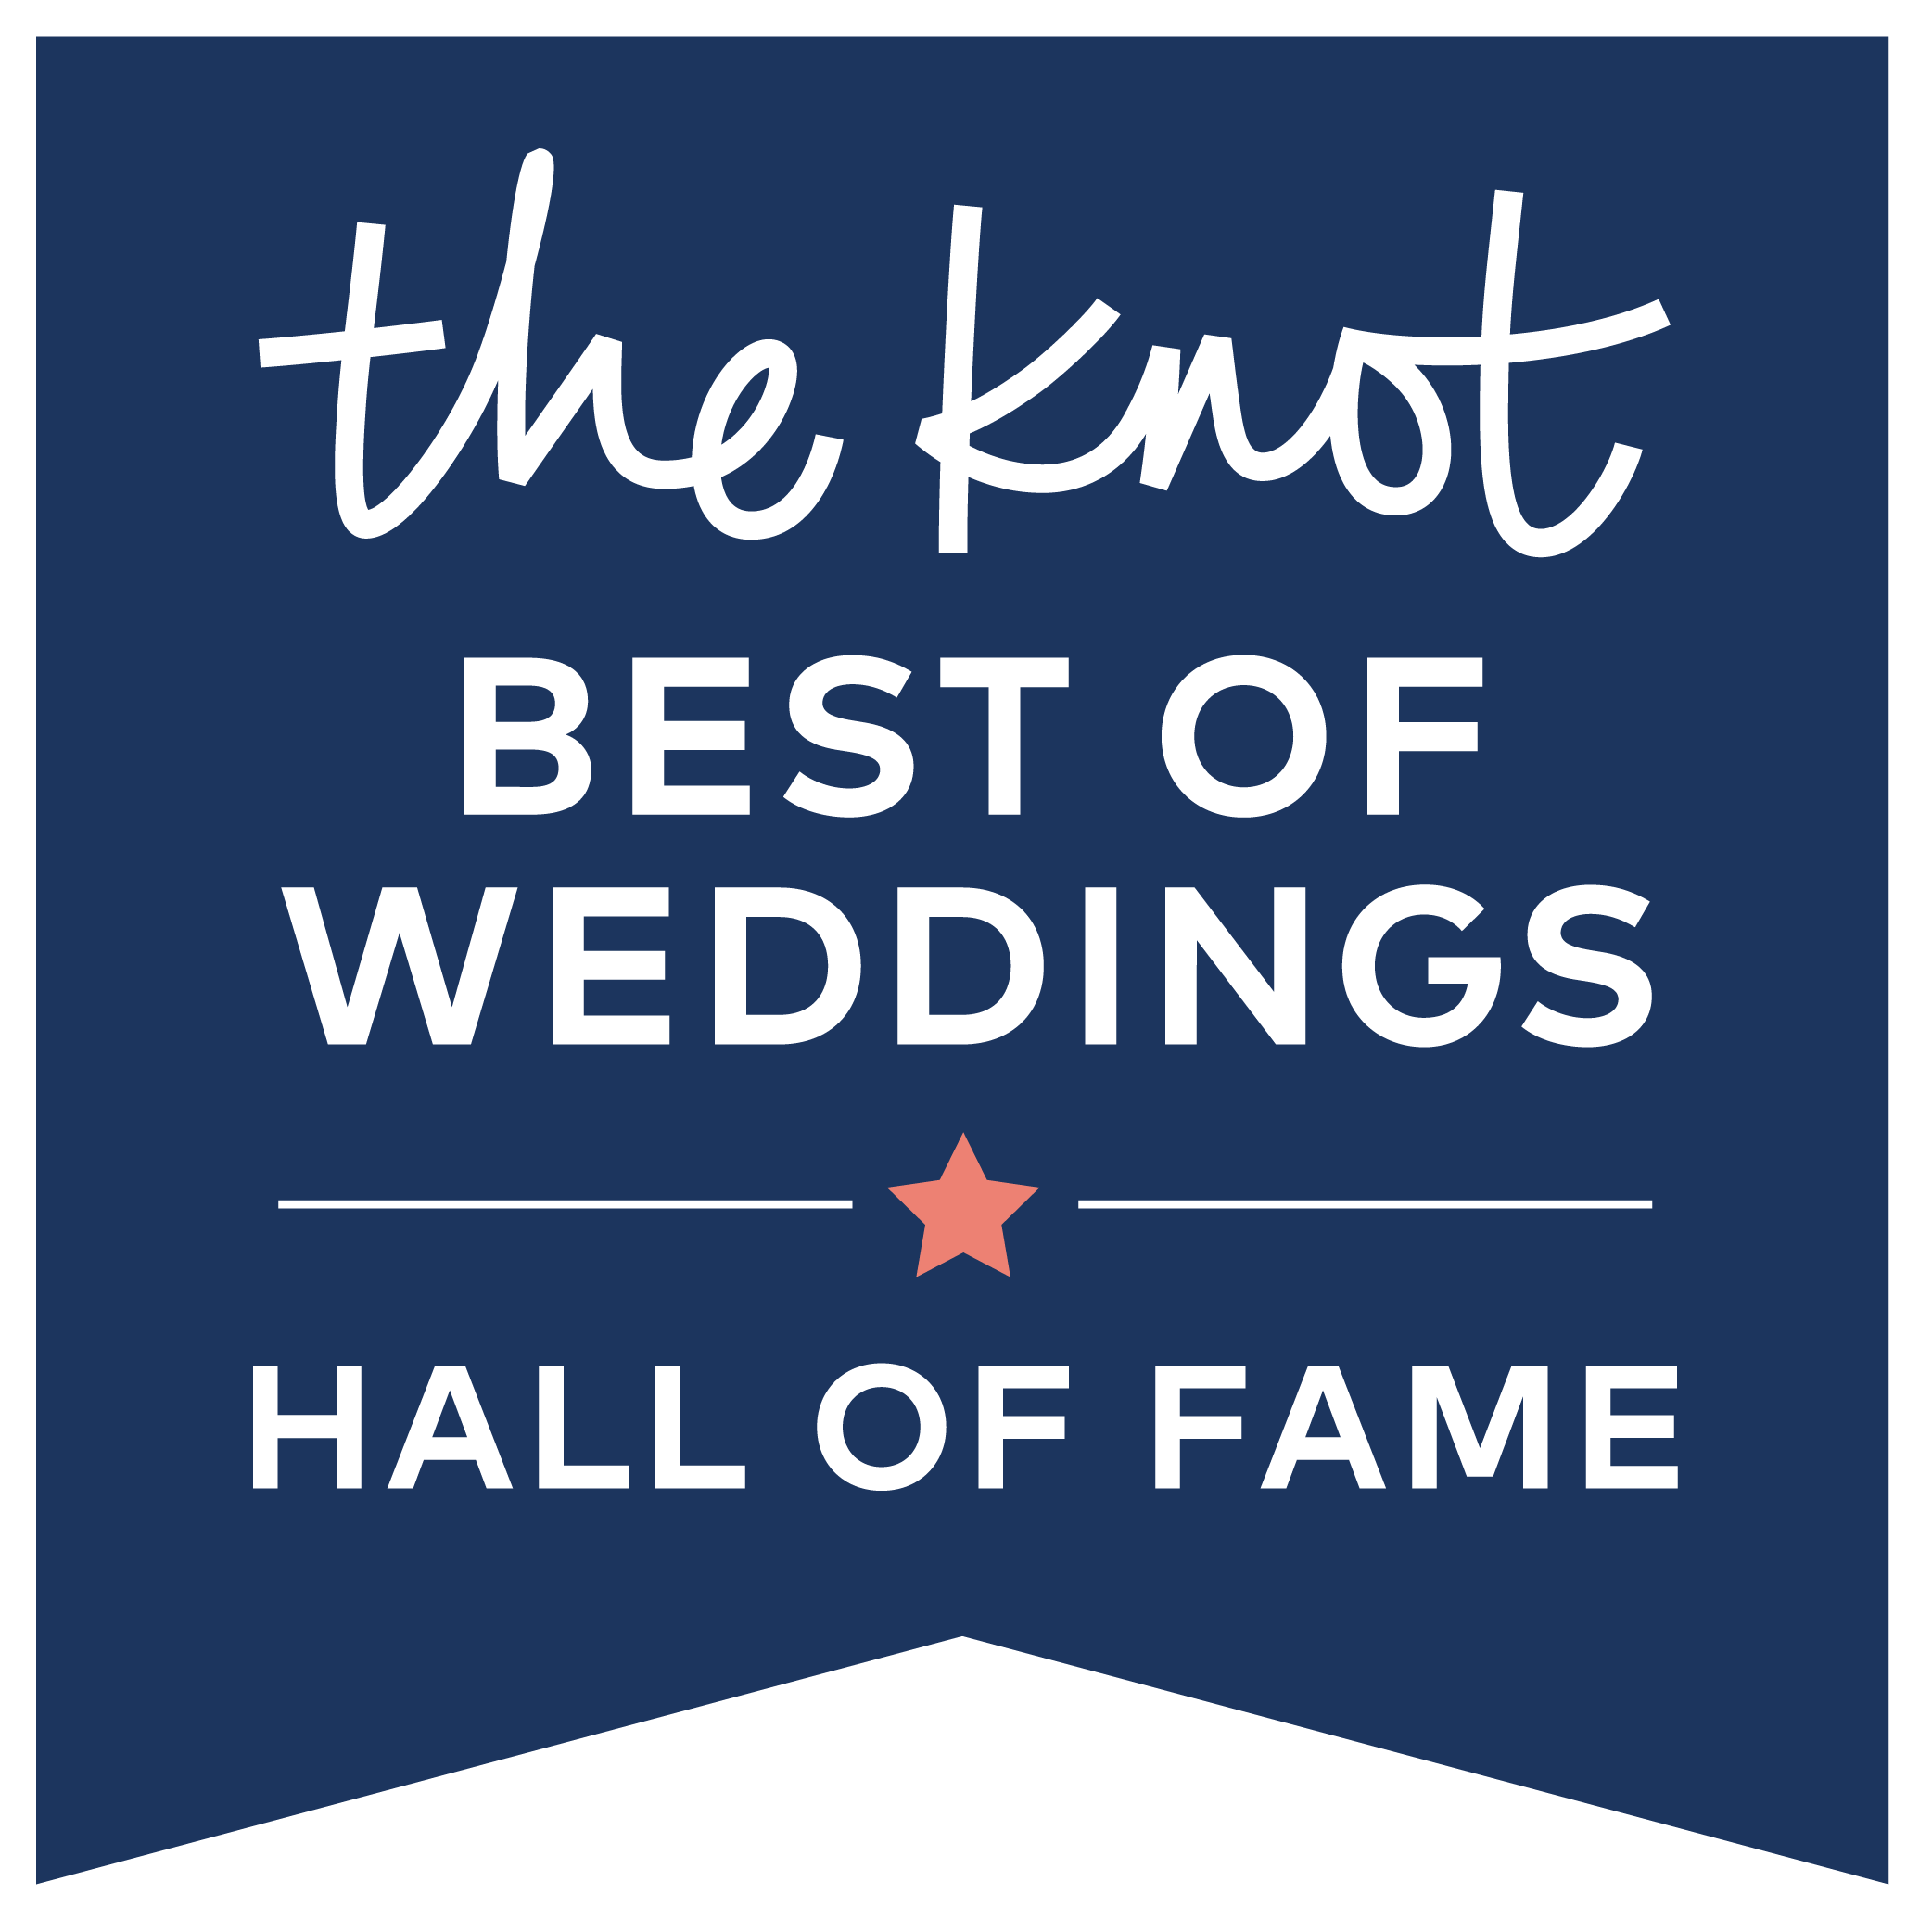 The Knot Best of Weddings Hall of Fame Award